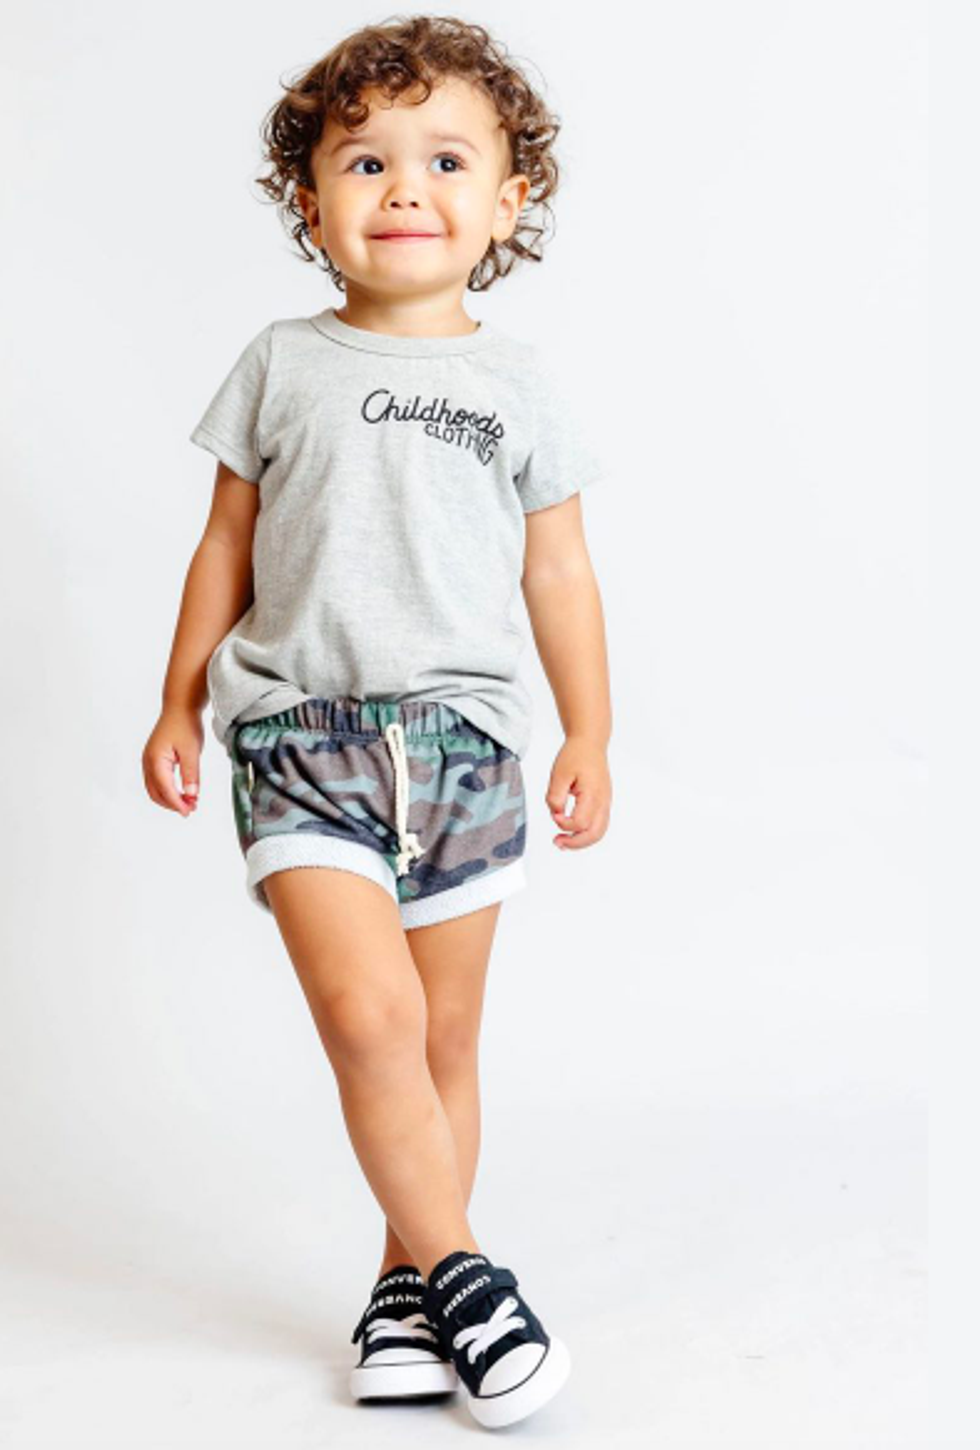 11 best kids’ clothing stores according to bloggers and real parents ...